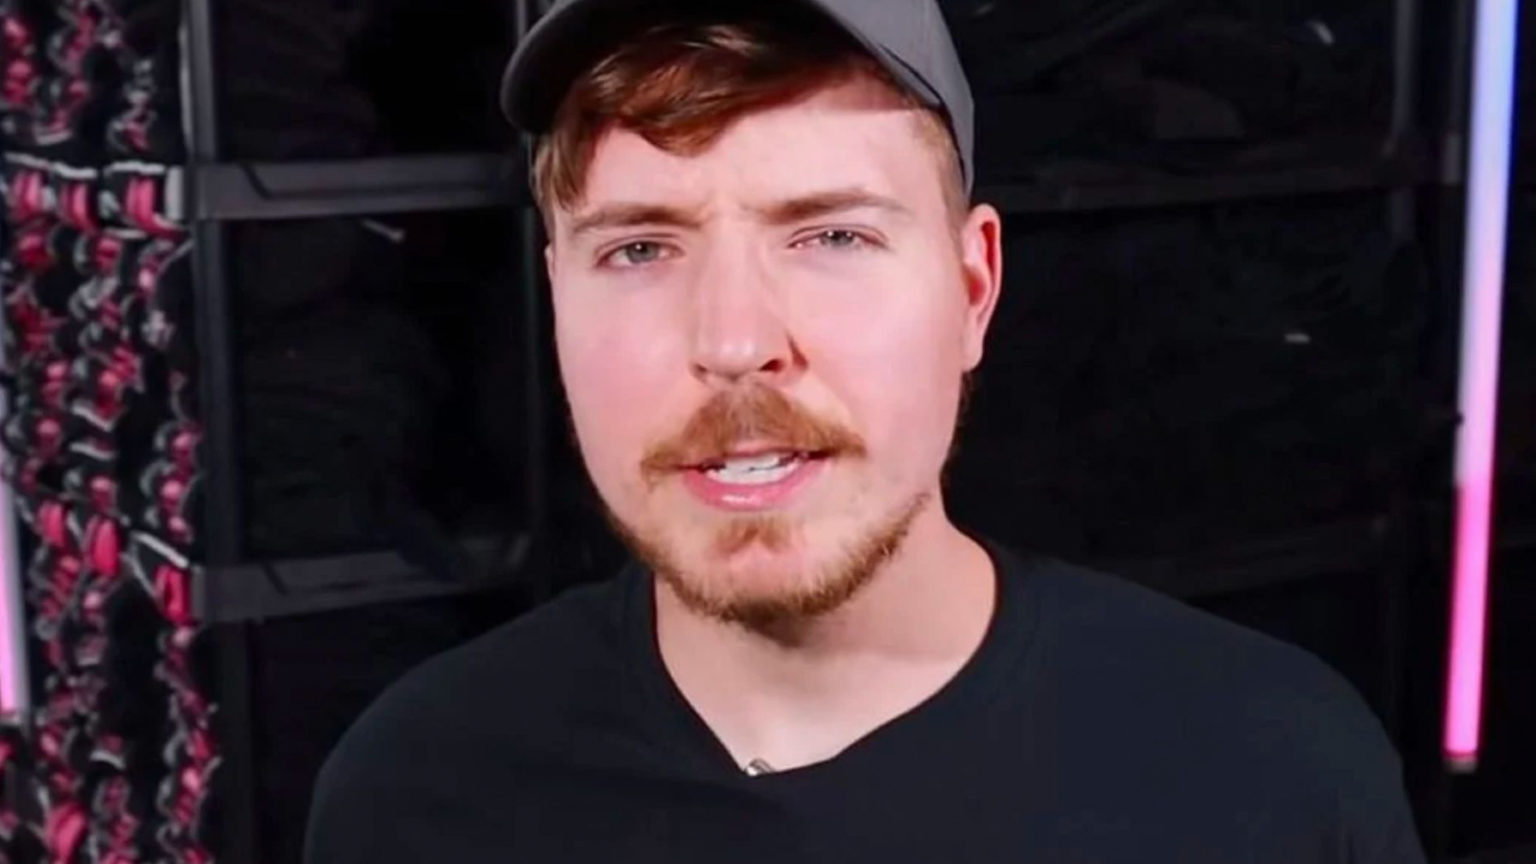 As he chases down the next milestone, MrBeast promises to 'avenge' PewDiePie